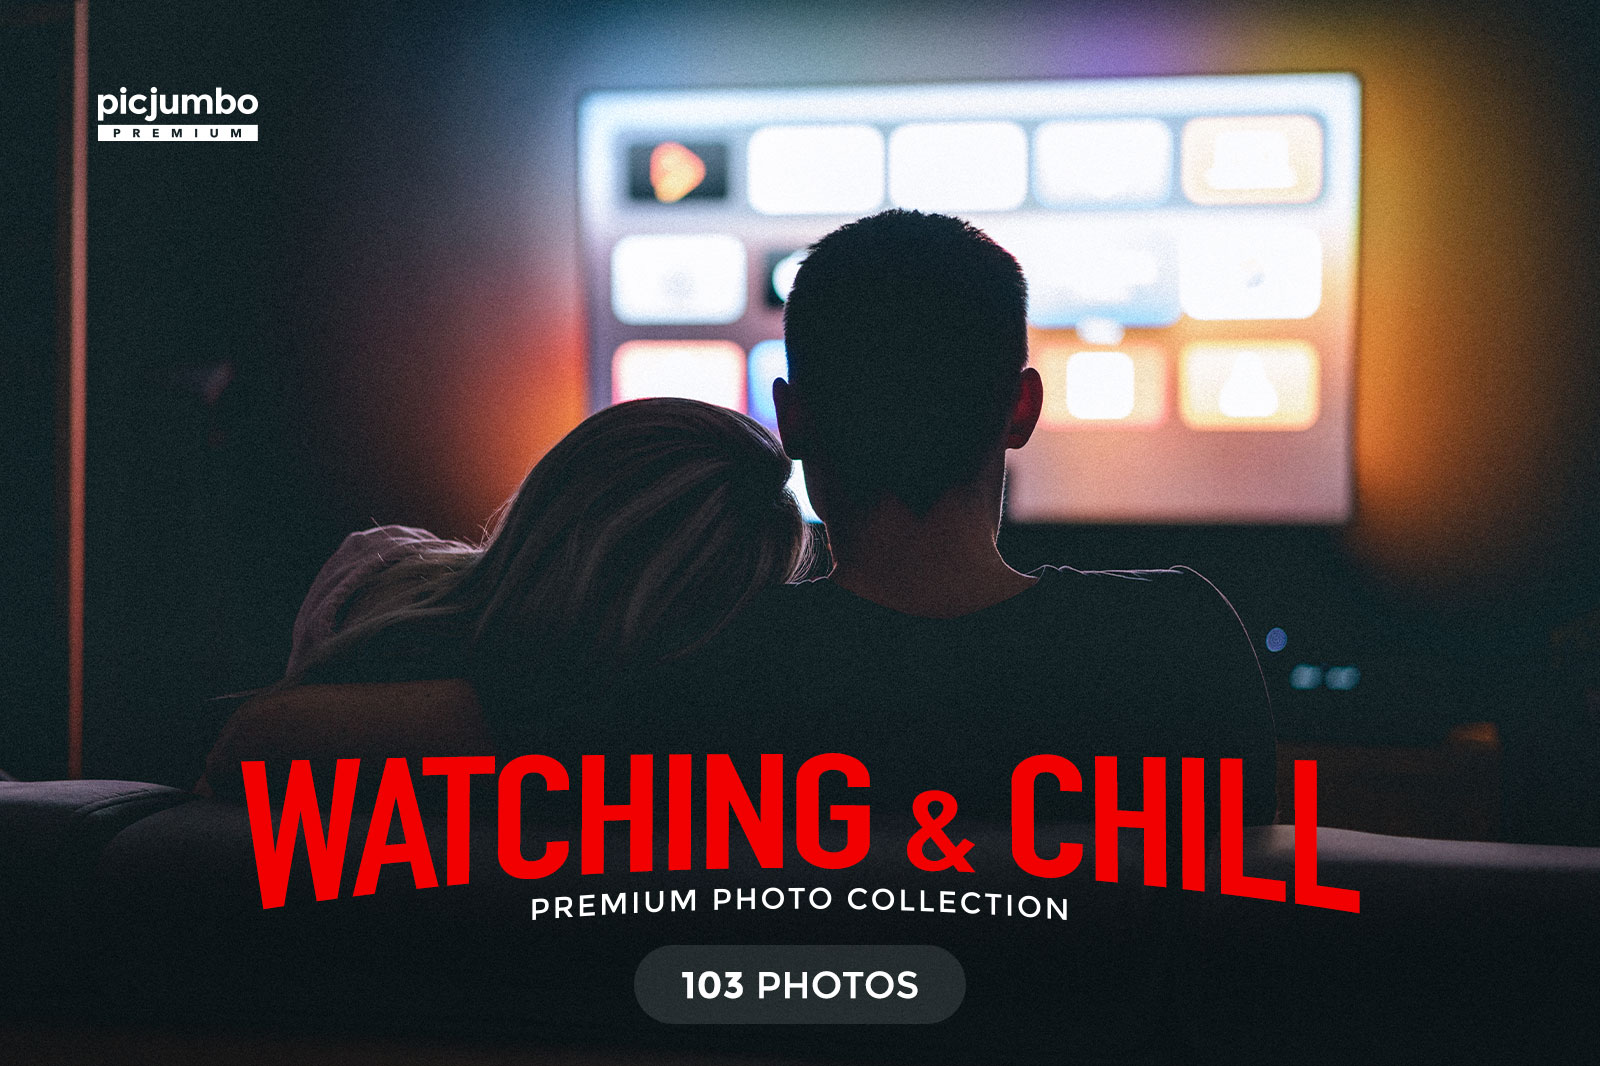 Download hi-res stock photos from our Watching & Chill PREMIUM Collection!